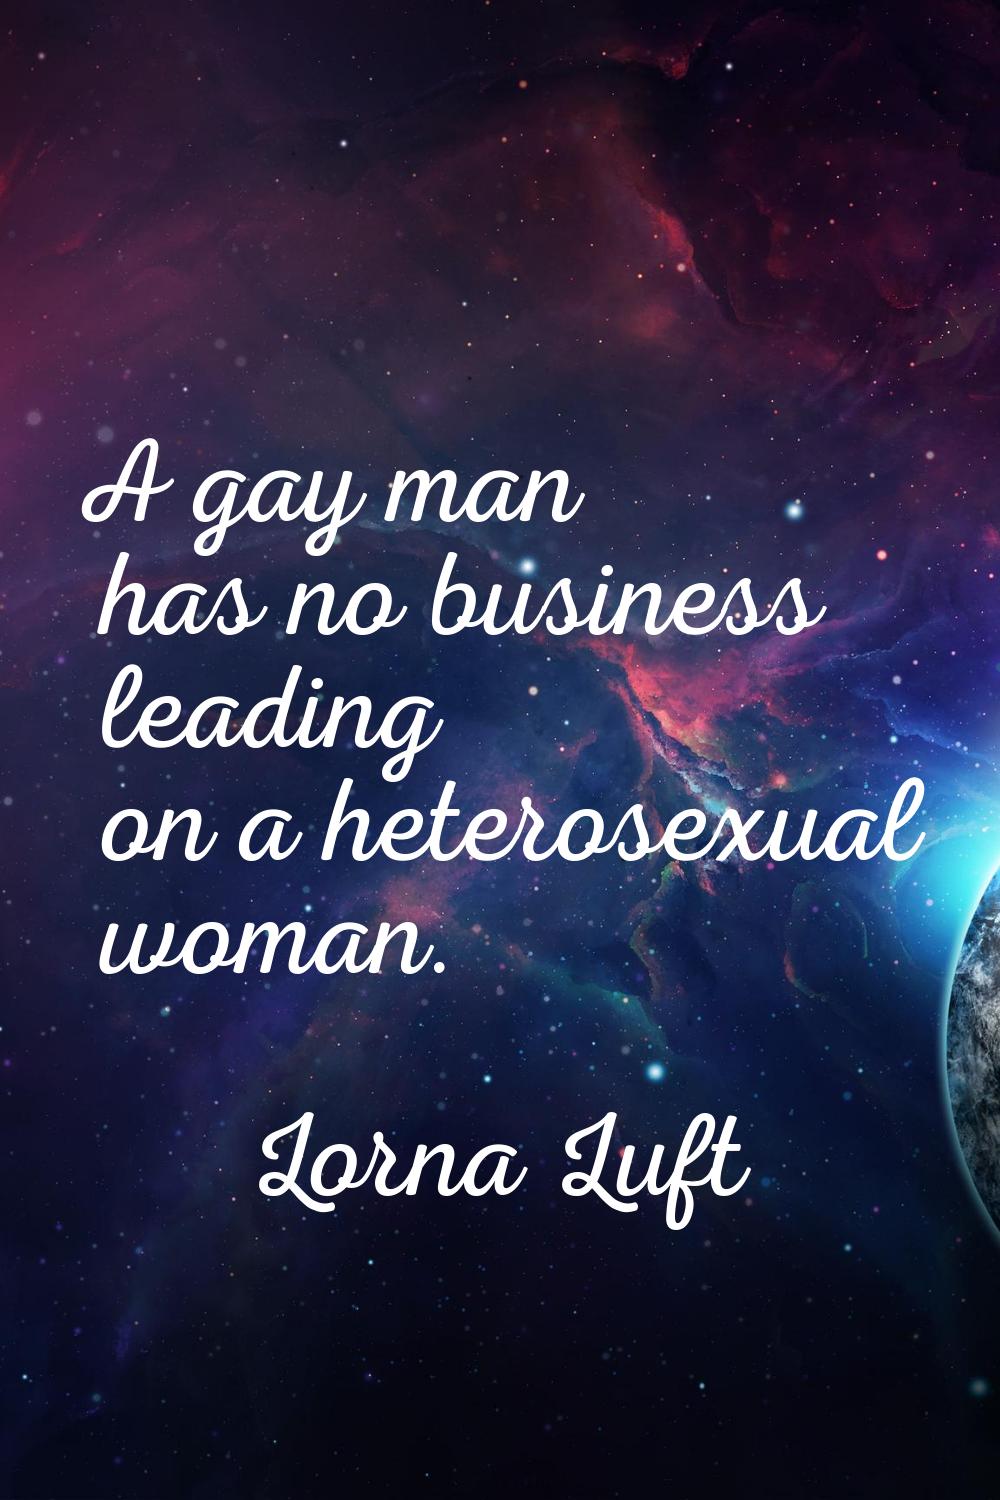 A gay man has no business leading on a heterosexual woman.